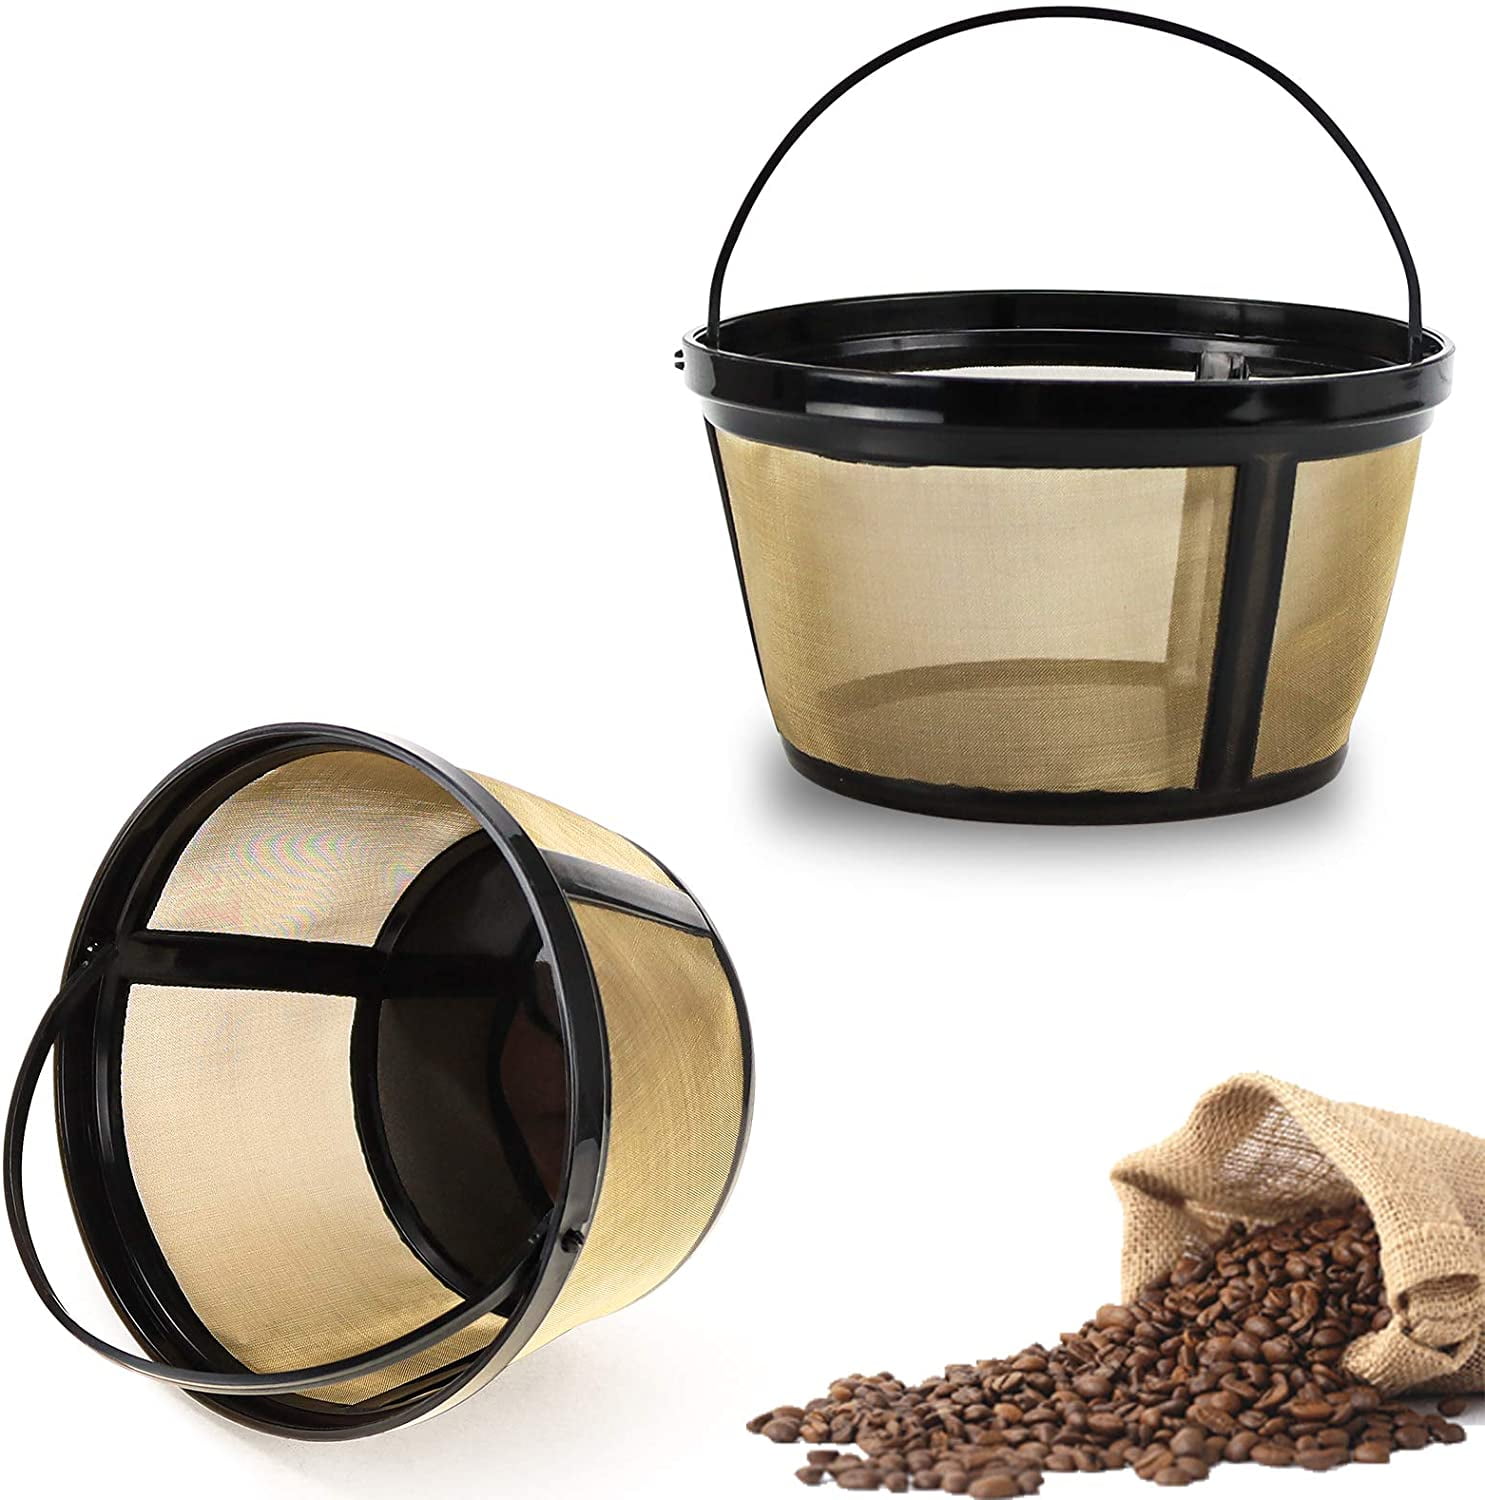  GOLDTONE Reusable 8-12 Cup Basket Coffee Filter fits Black and  Decker Makers and Brewers, Replaces your Paper Coffee Filters, BPA-Free:  Home & Kitchen